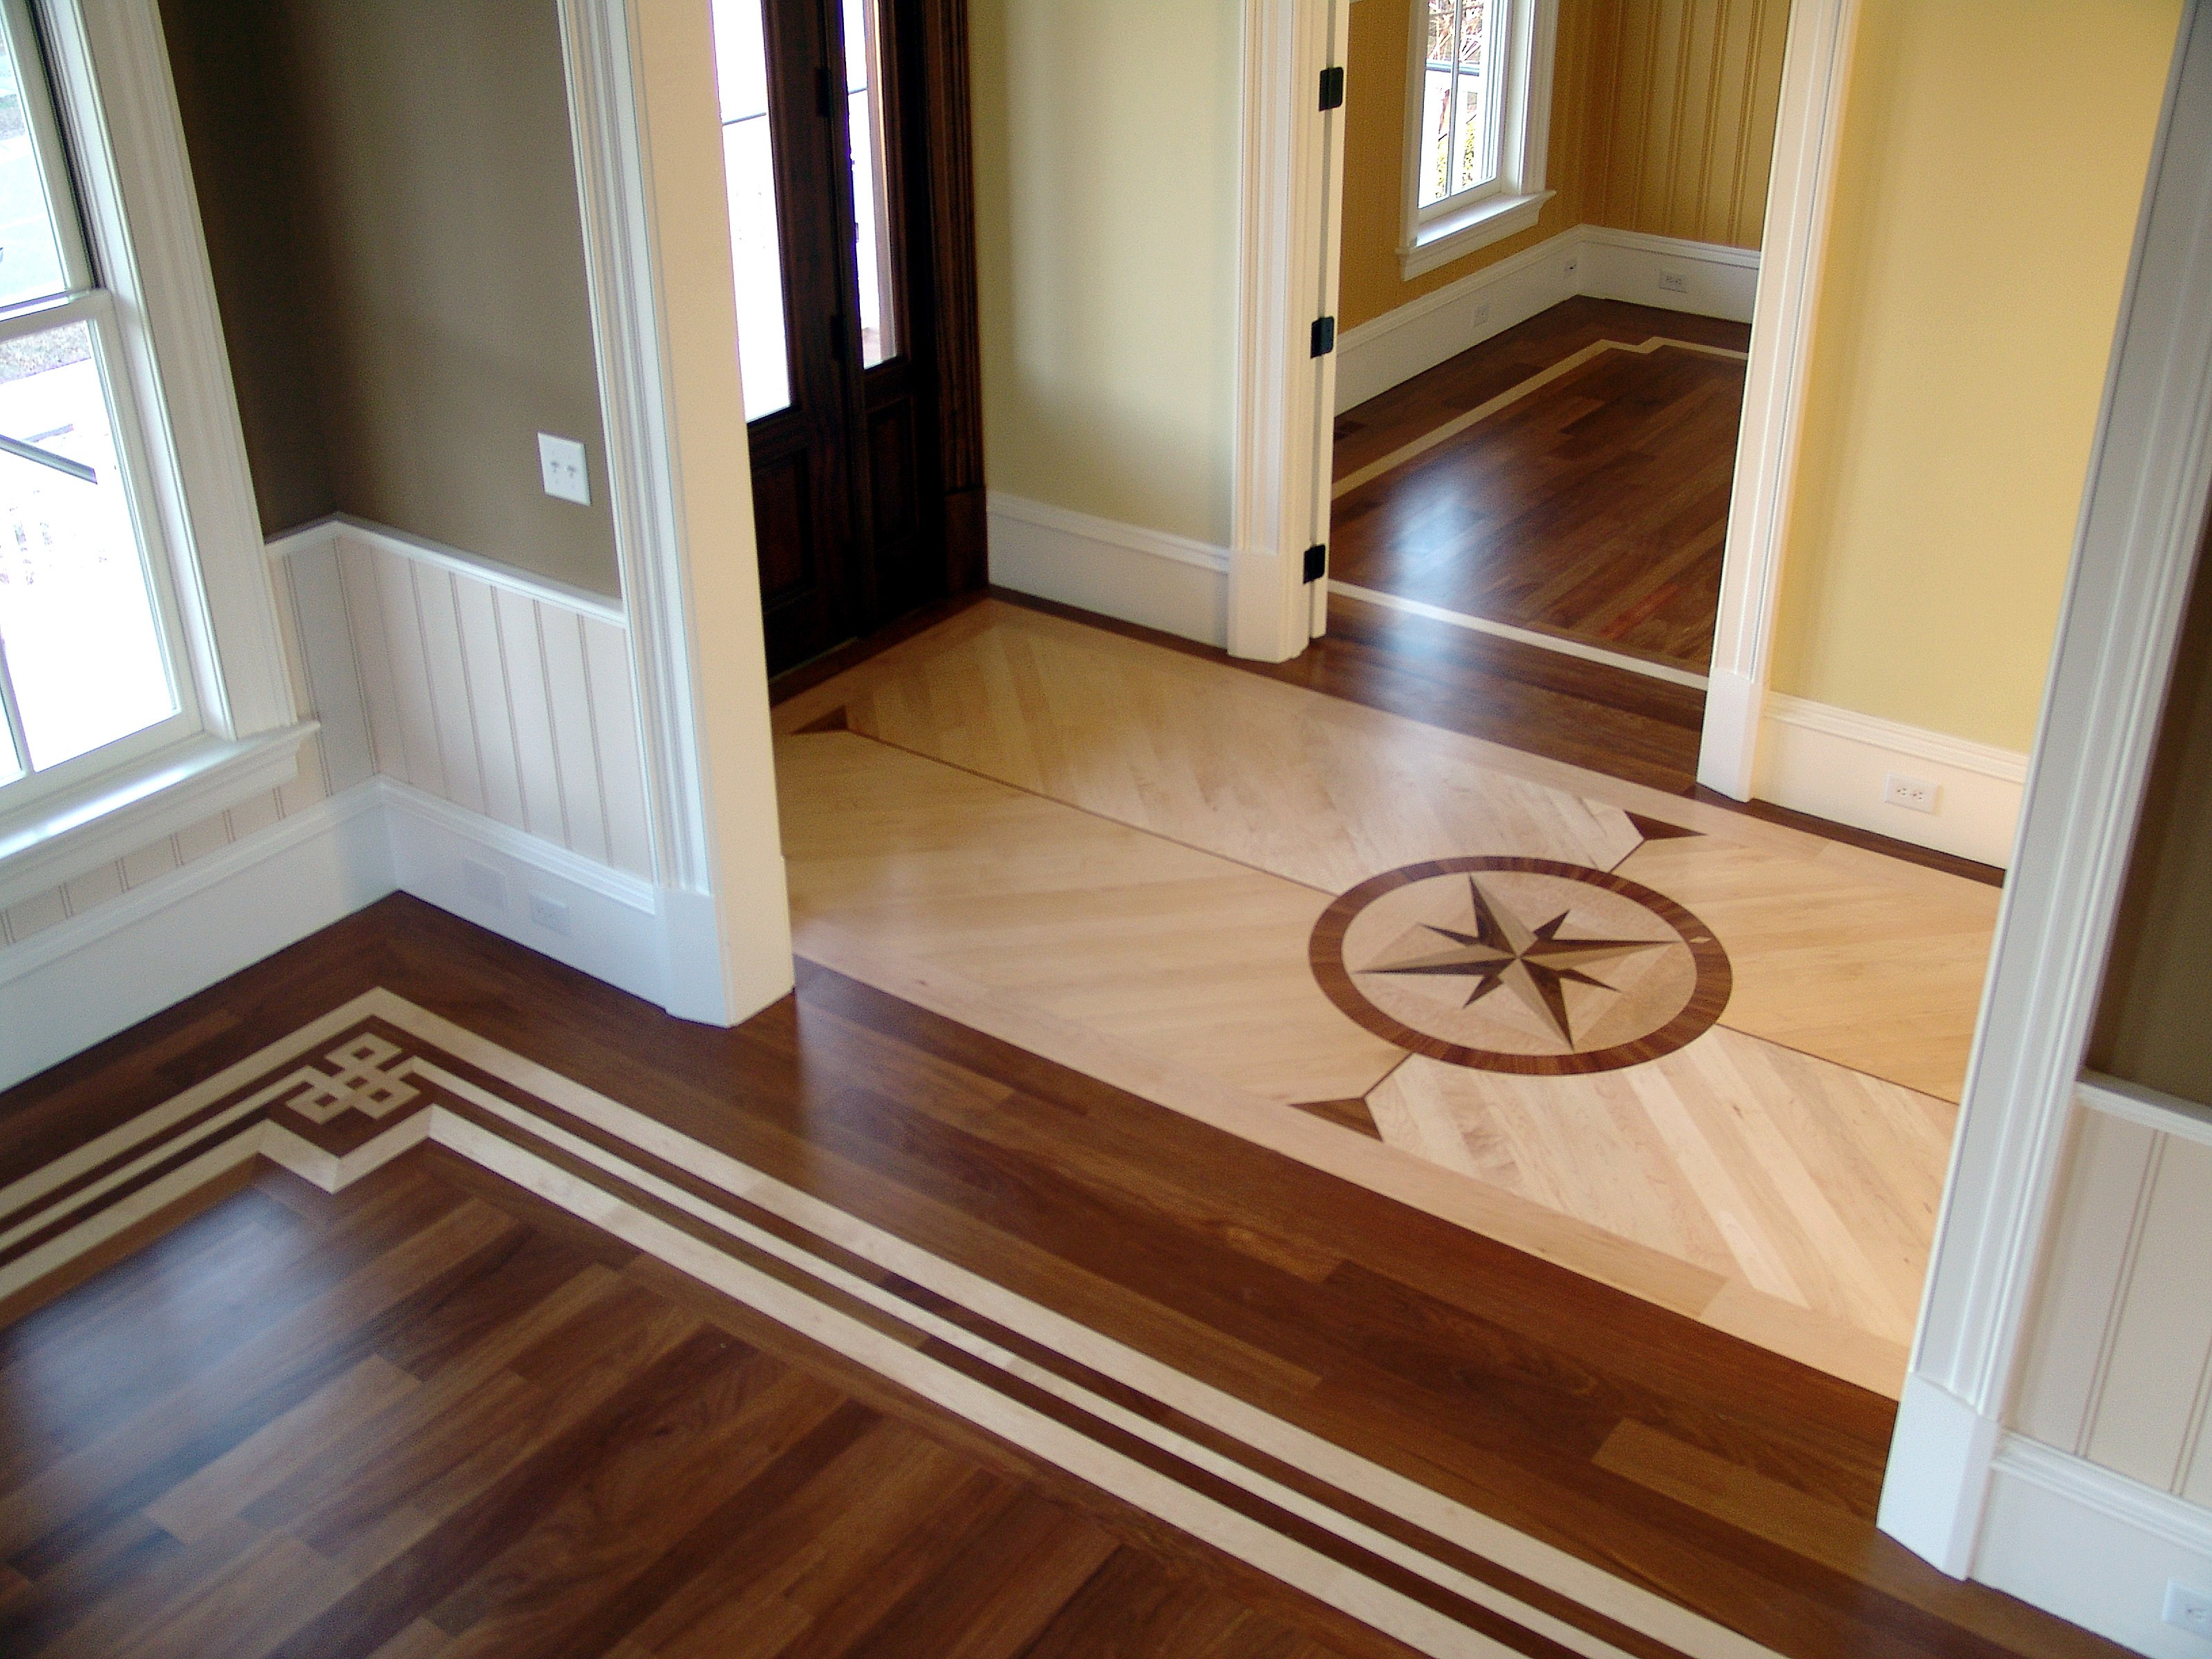 30 Popular Cost to Re Sand and Finish Hardwood Floors 2024 free download cost to re sand and finish hardwood floors of imperial wood floors madison wi hardwood floors hardwood floor within home a